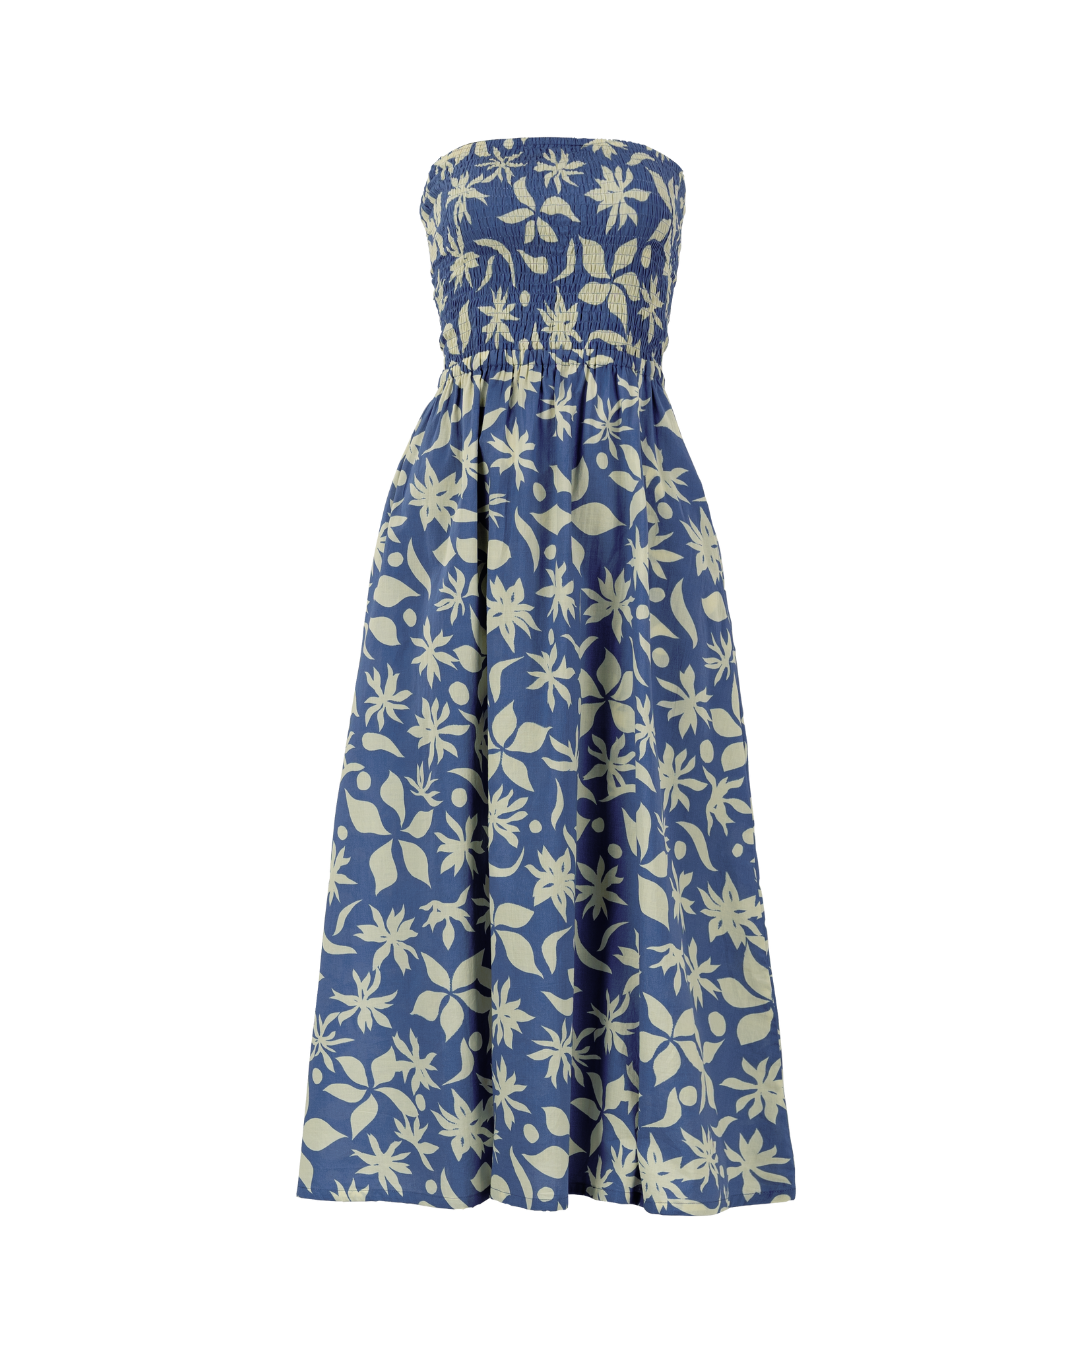 Shirred Tube Top Midi Dress in Blue Floral